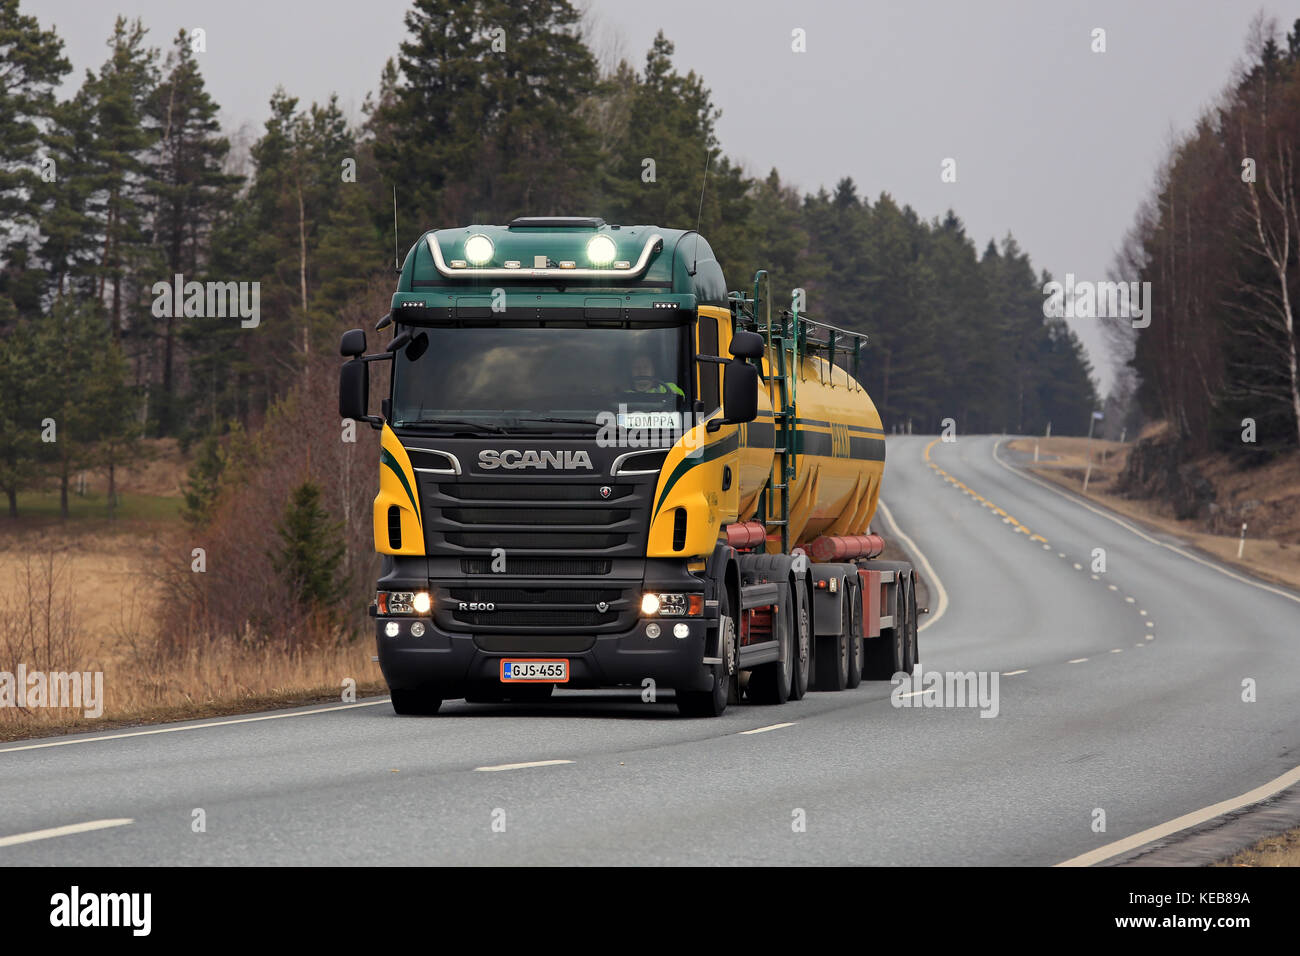 SALO, FINLAND - MARCH 28, 2016: Colorful Scania R500 tank truck on the road in South of Finland. The driver flashes the high beams briefly. Stock Photo